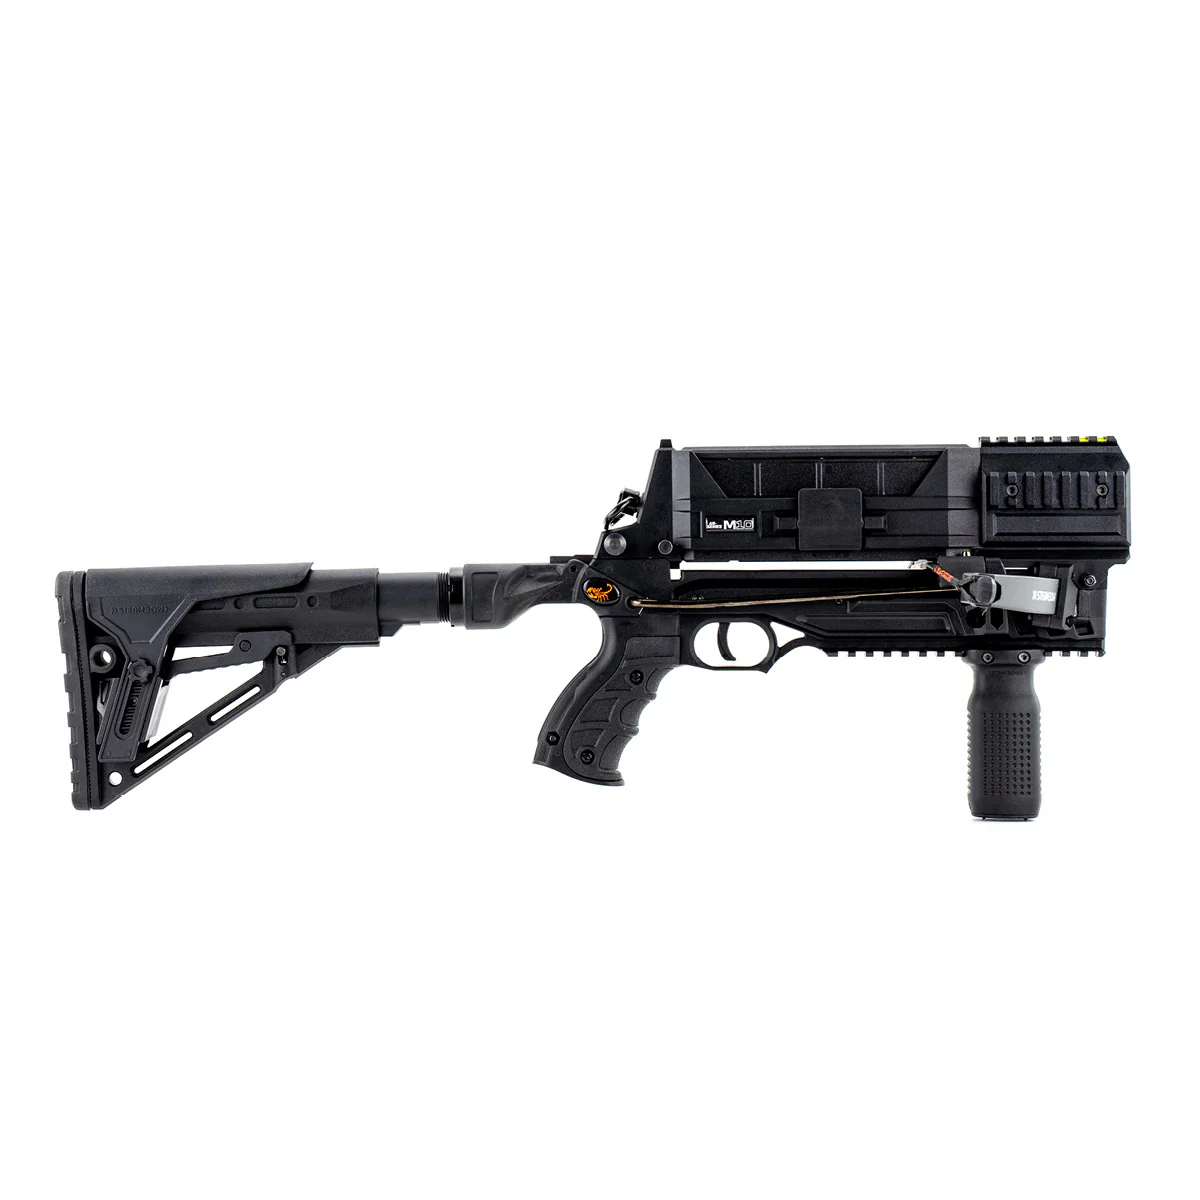 Steambow AR-Series M10 Tactical repeating crossbow with 10-round interchangeable magazine